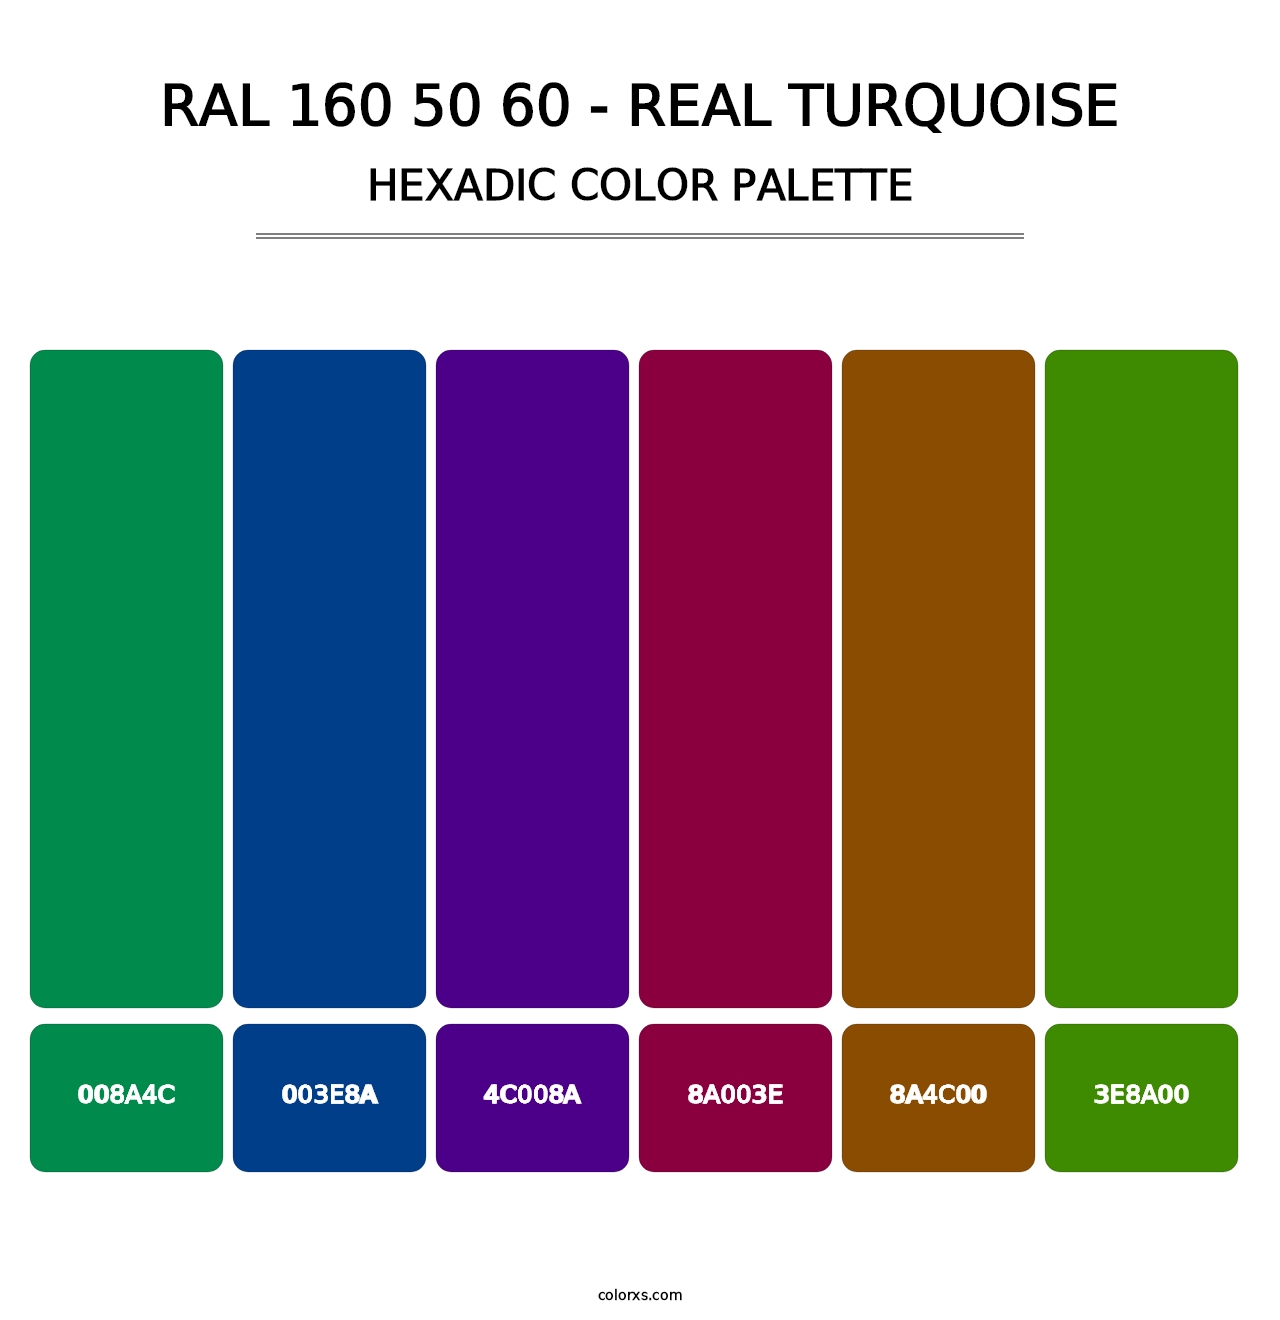 RAL 160 50 60 - Real Turquoise - Hexadic Color Palette